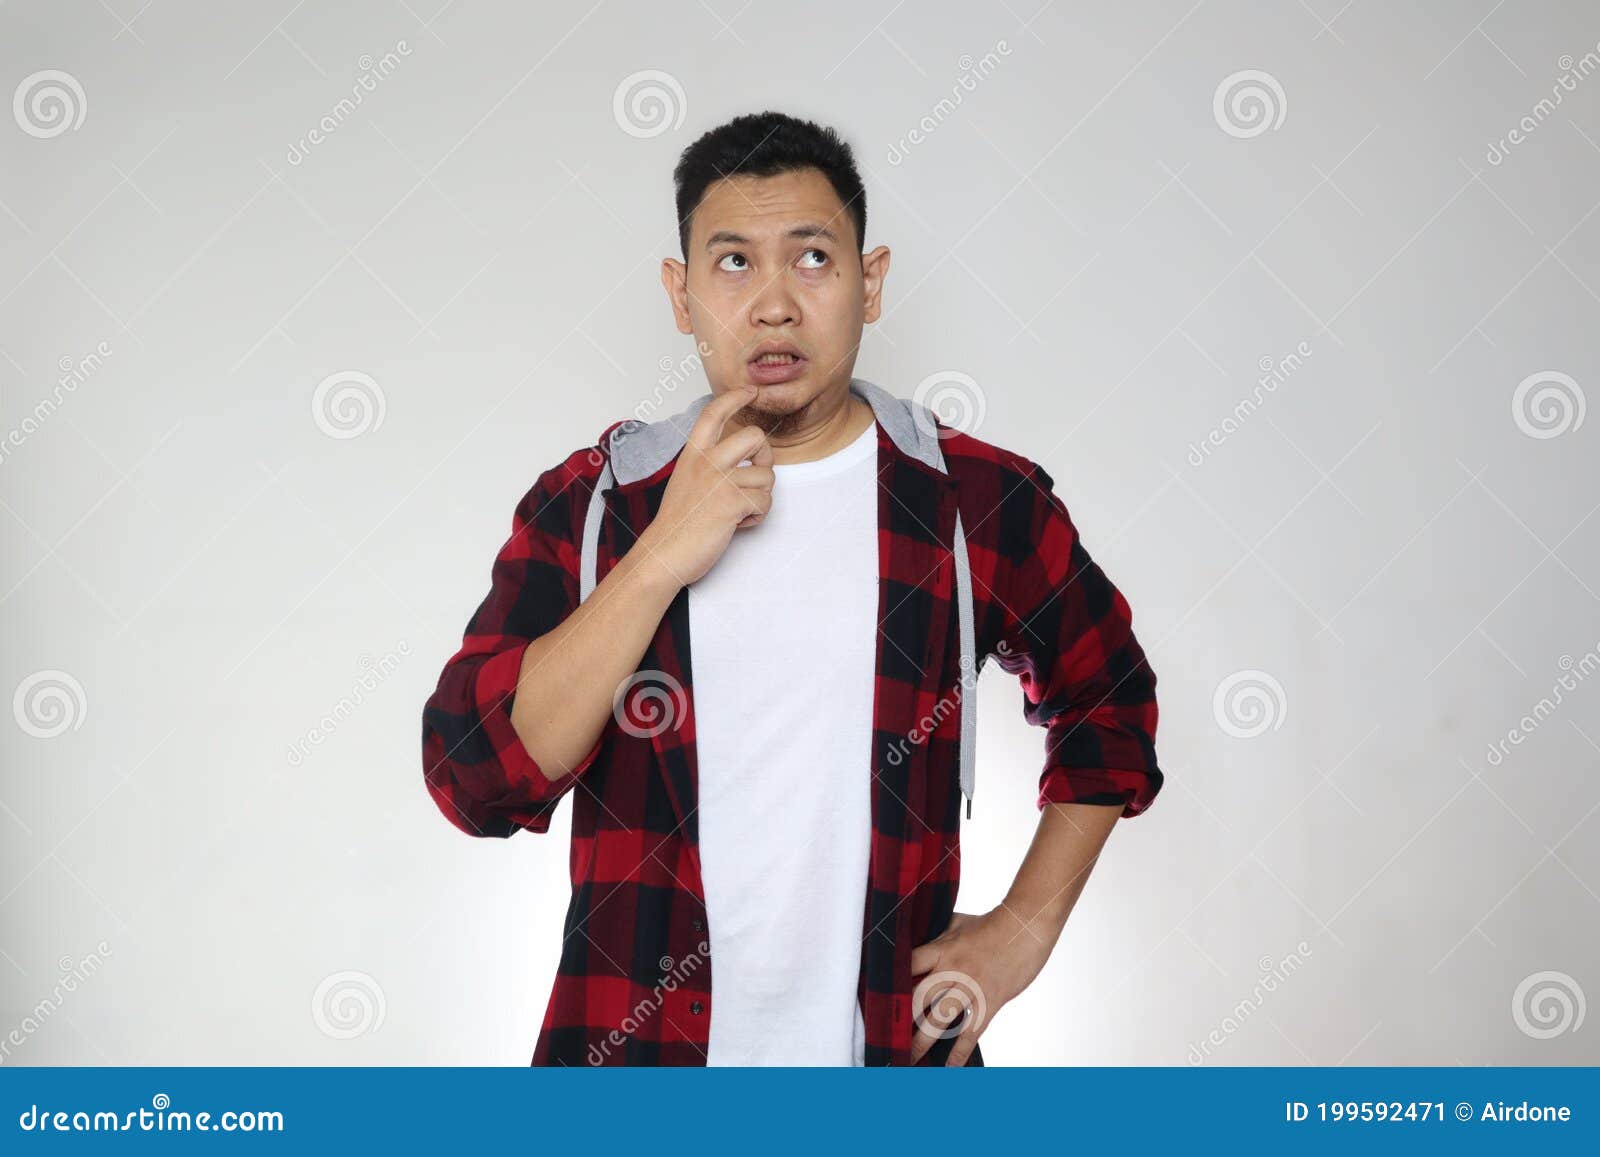 asian man touching his lip with pointing finger, looking up and thinking hard, trying to remember gesture